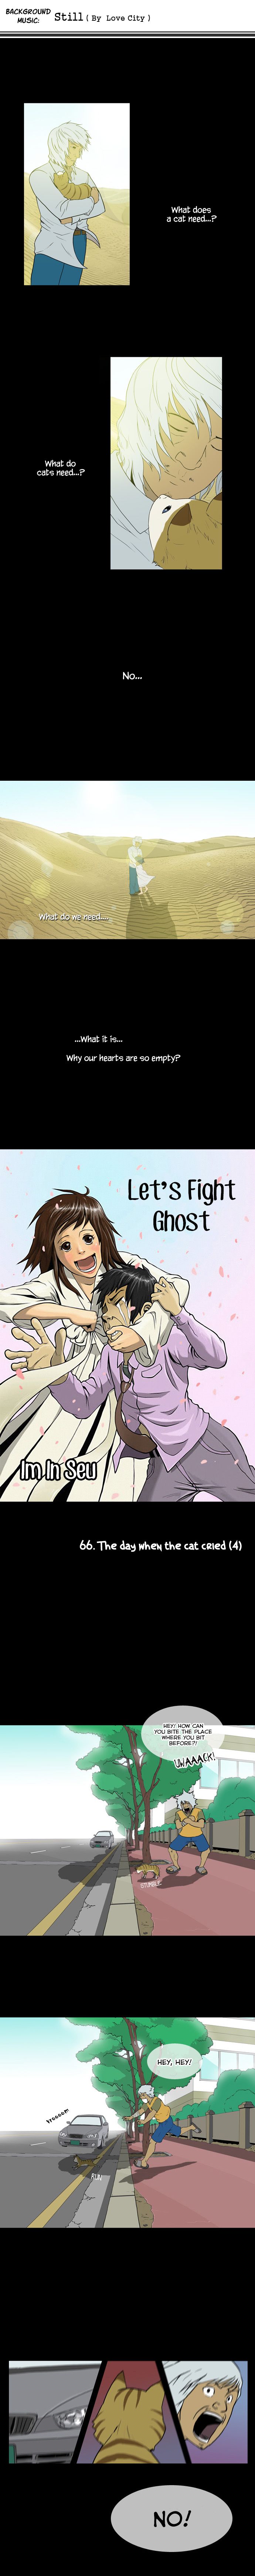 Let's Fight Ghost 66